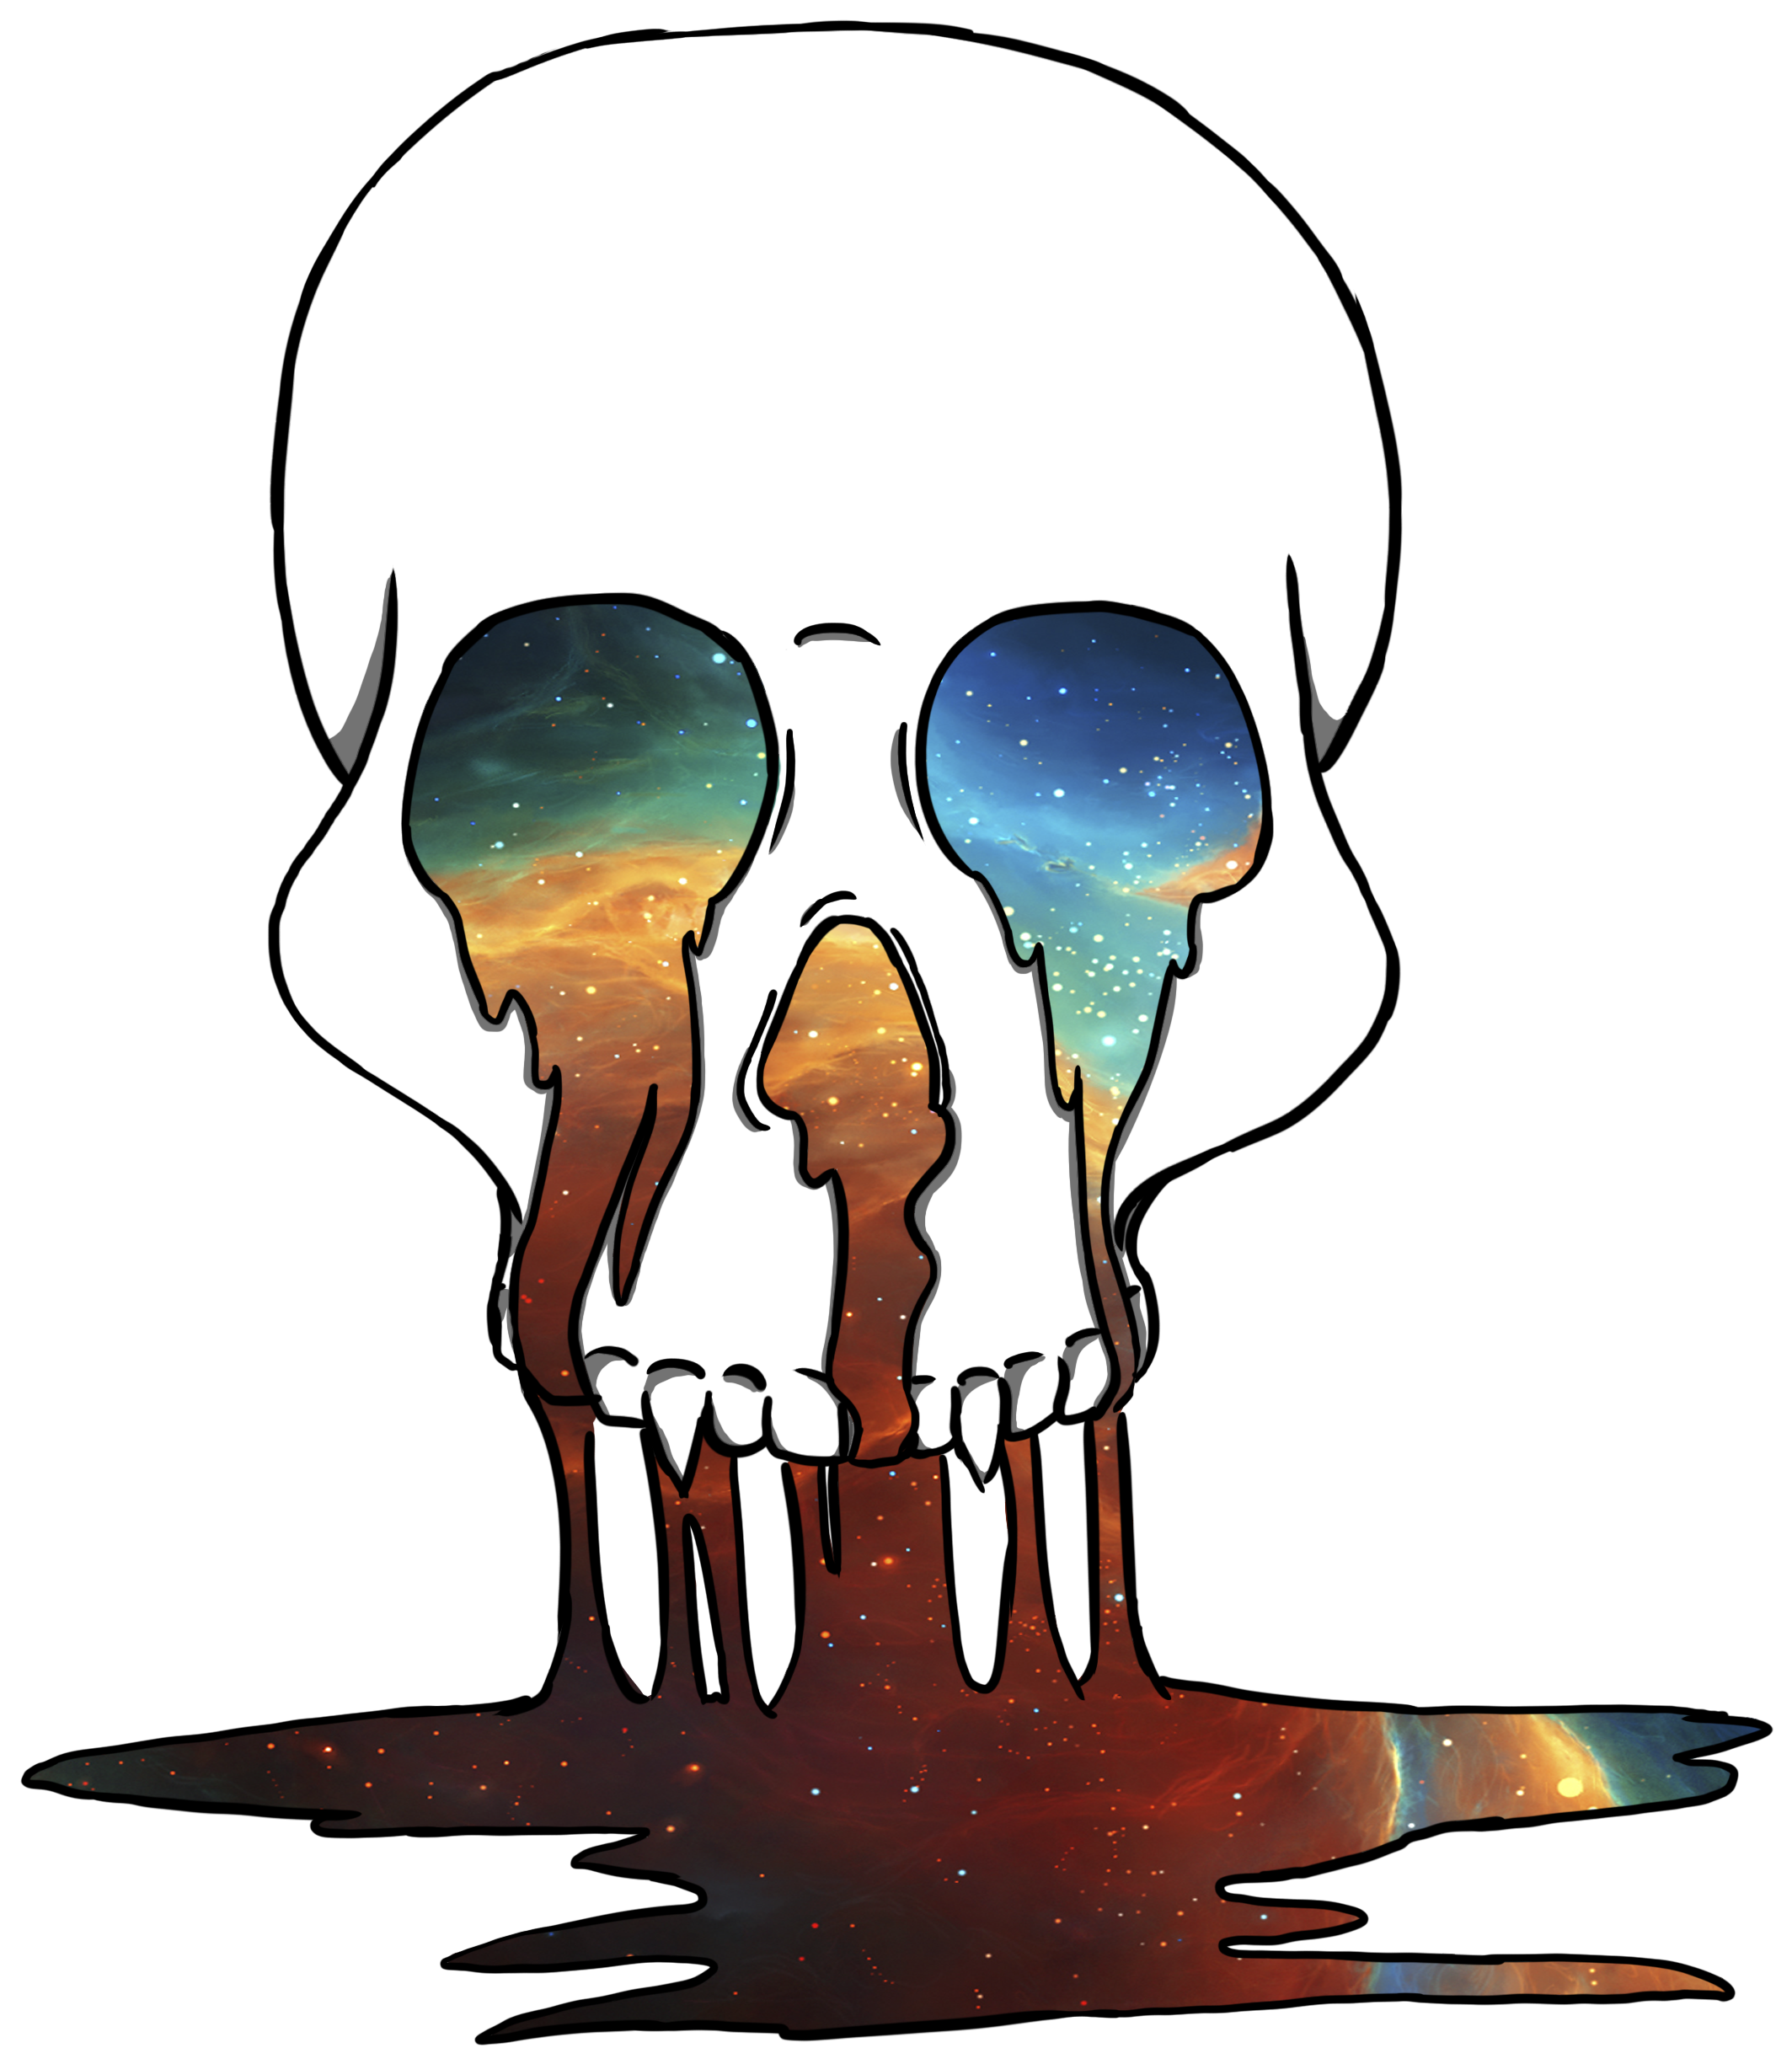 A Skull With A Colorful Image Of Space And Stars